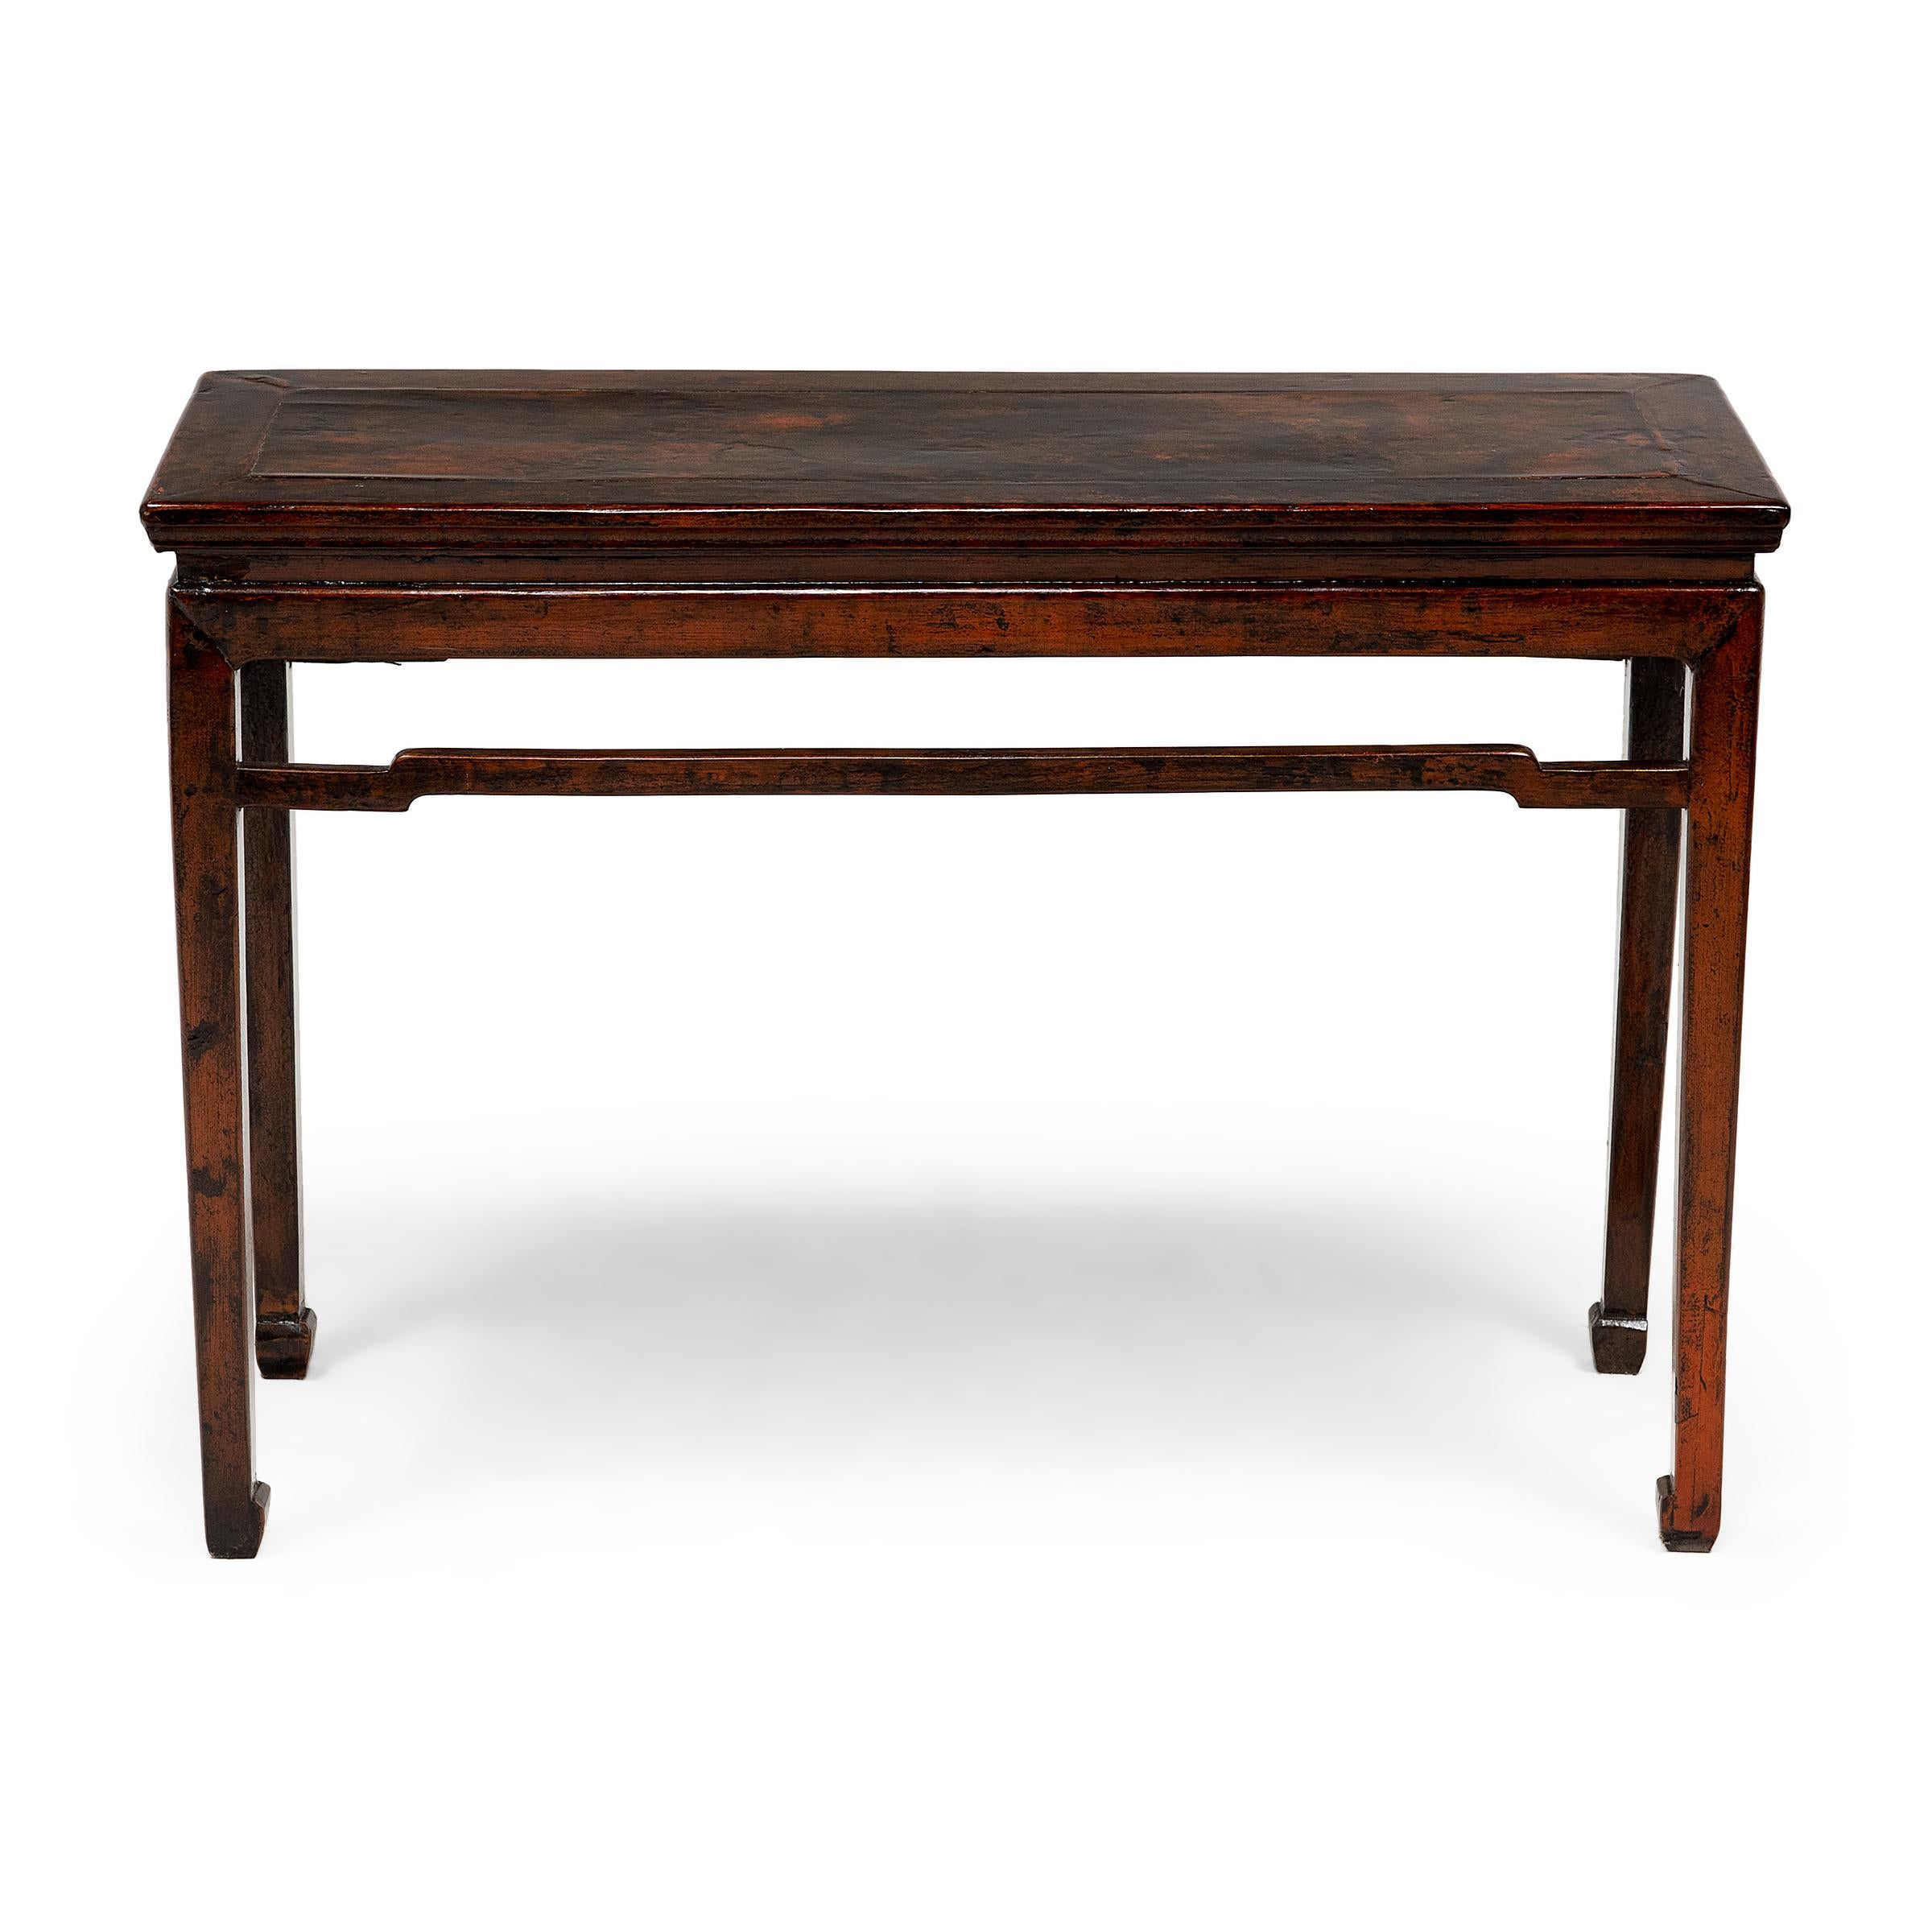 Lacquered Chinese Persimmon Lacquer Altar Table, c. 1900 For Sale